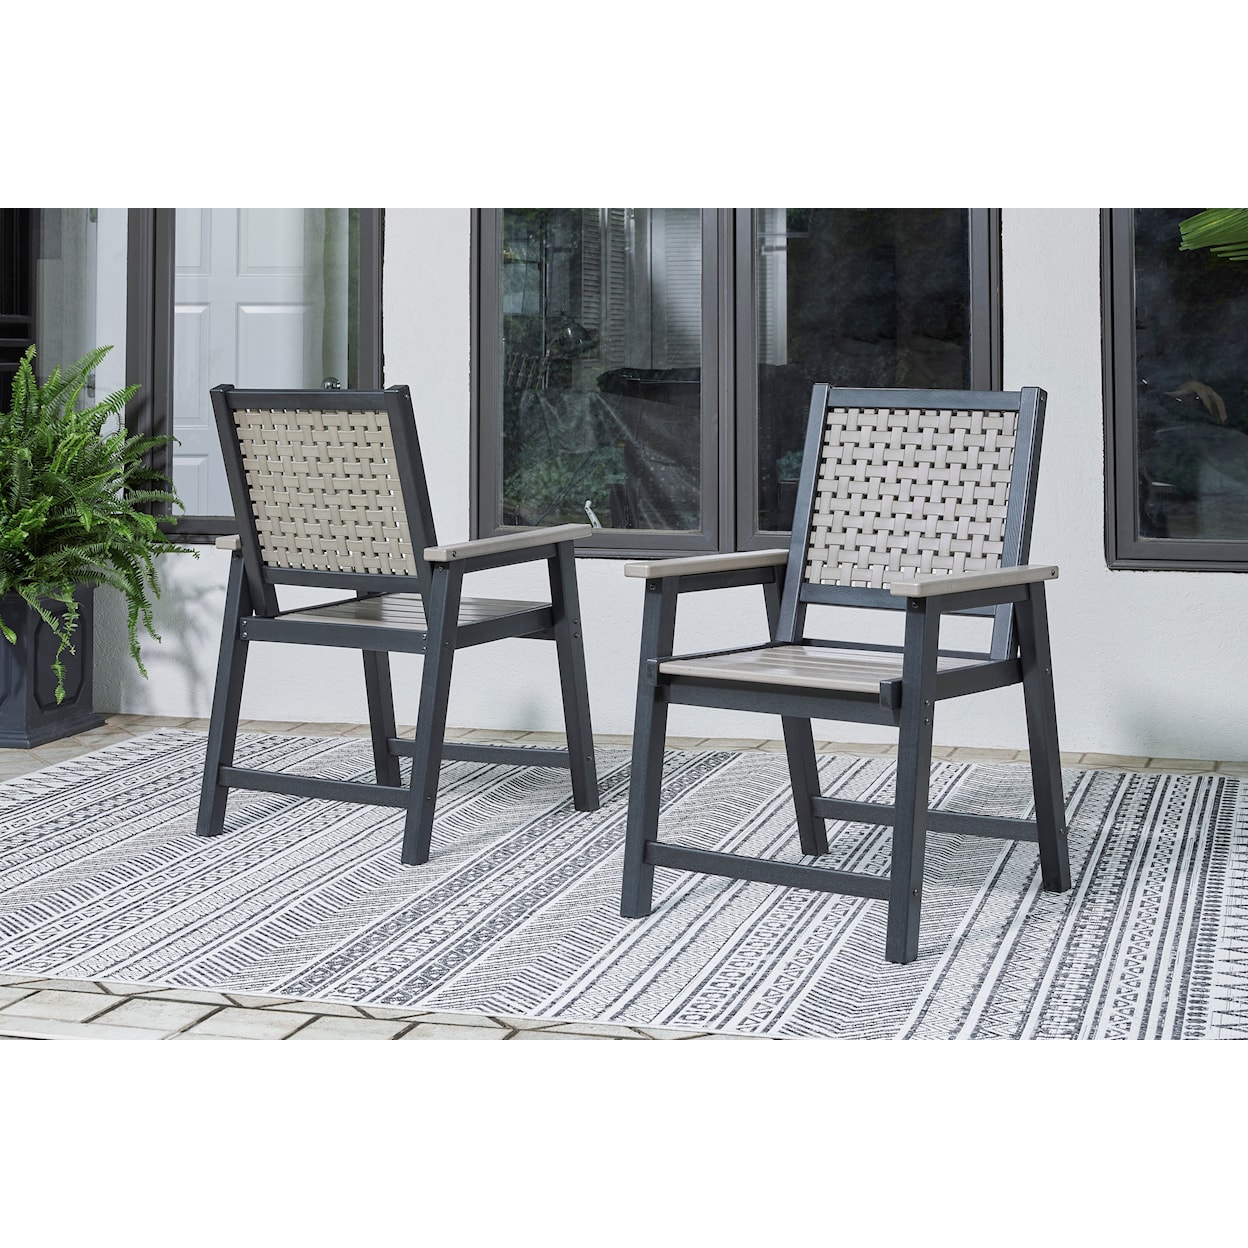 Ashley Furniture Signature Design Mount Valley Outdoor Dining Chair (Set of 2)